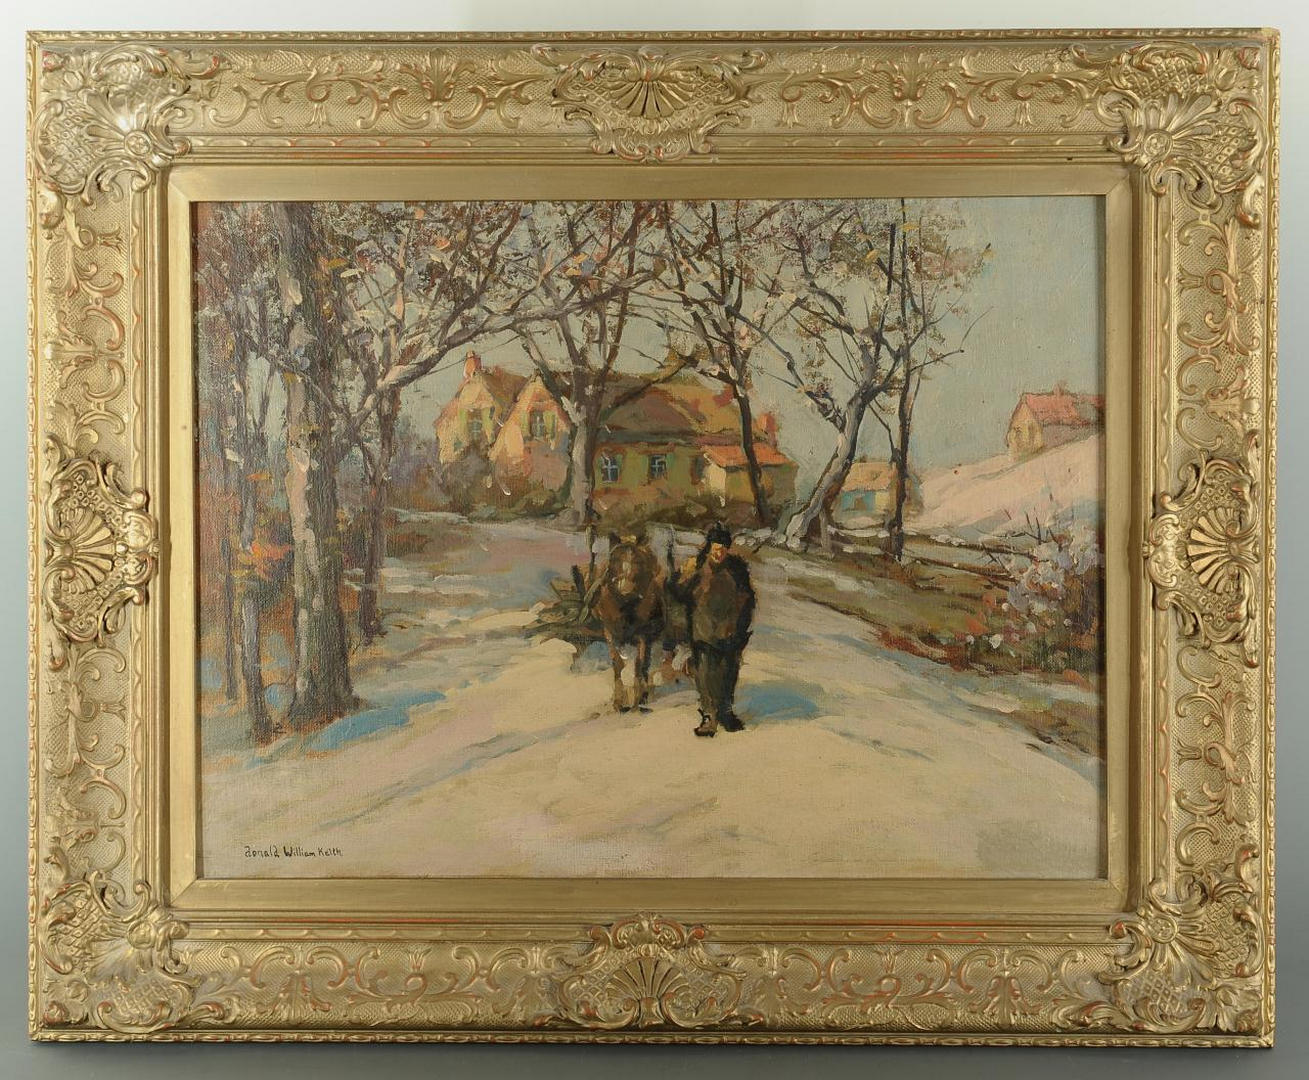 Lot 333: Winter Landscape by Donald William Keith